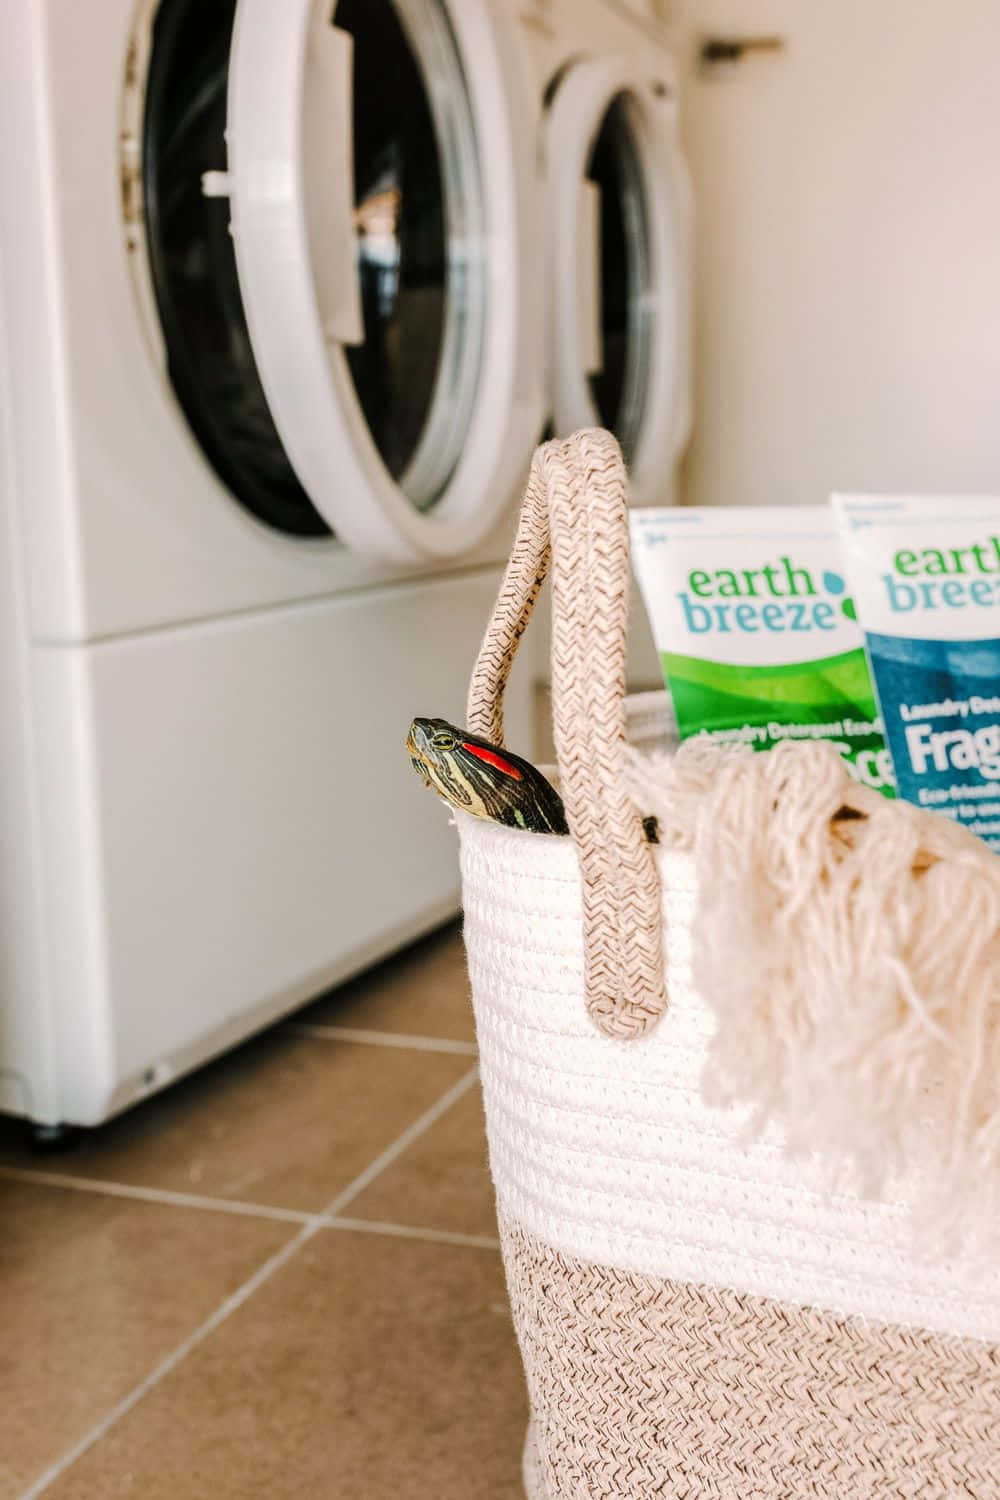 Earth Breeze Laundry Room Picture